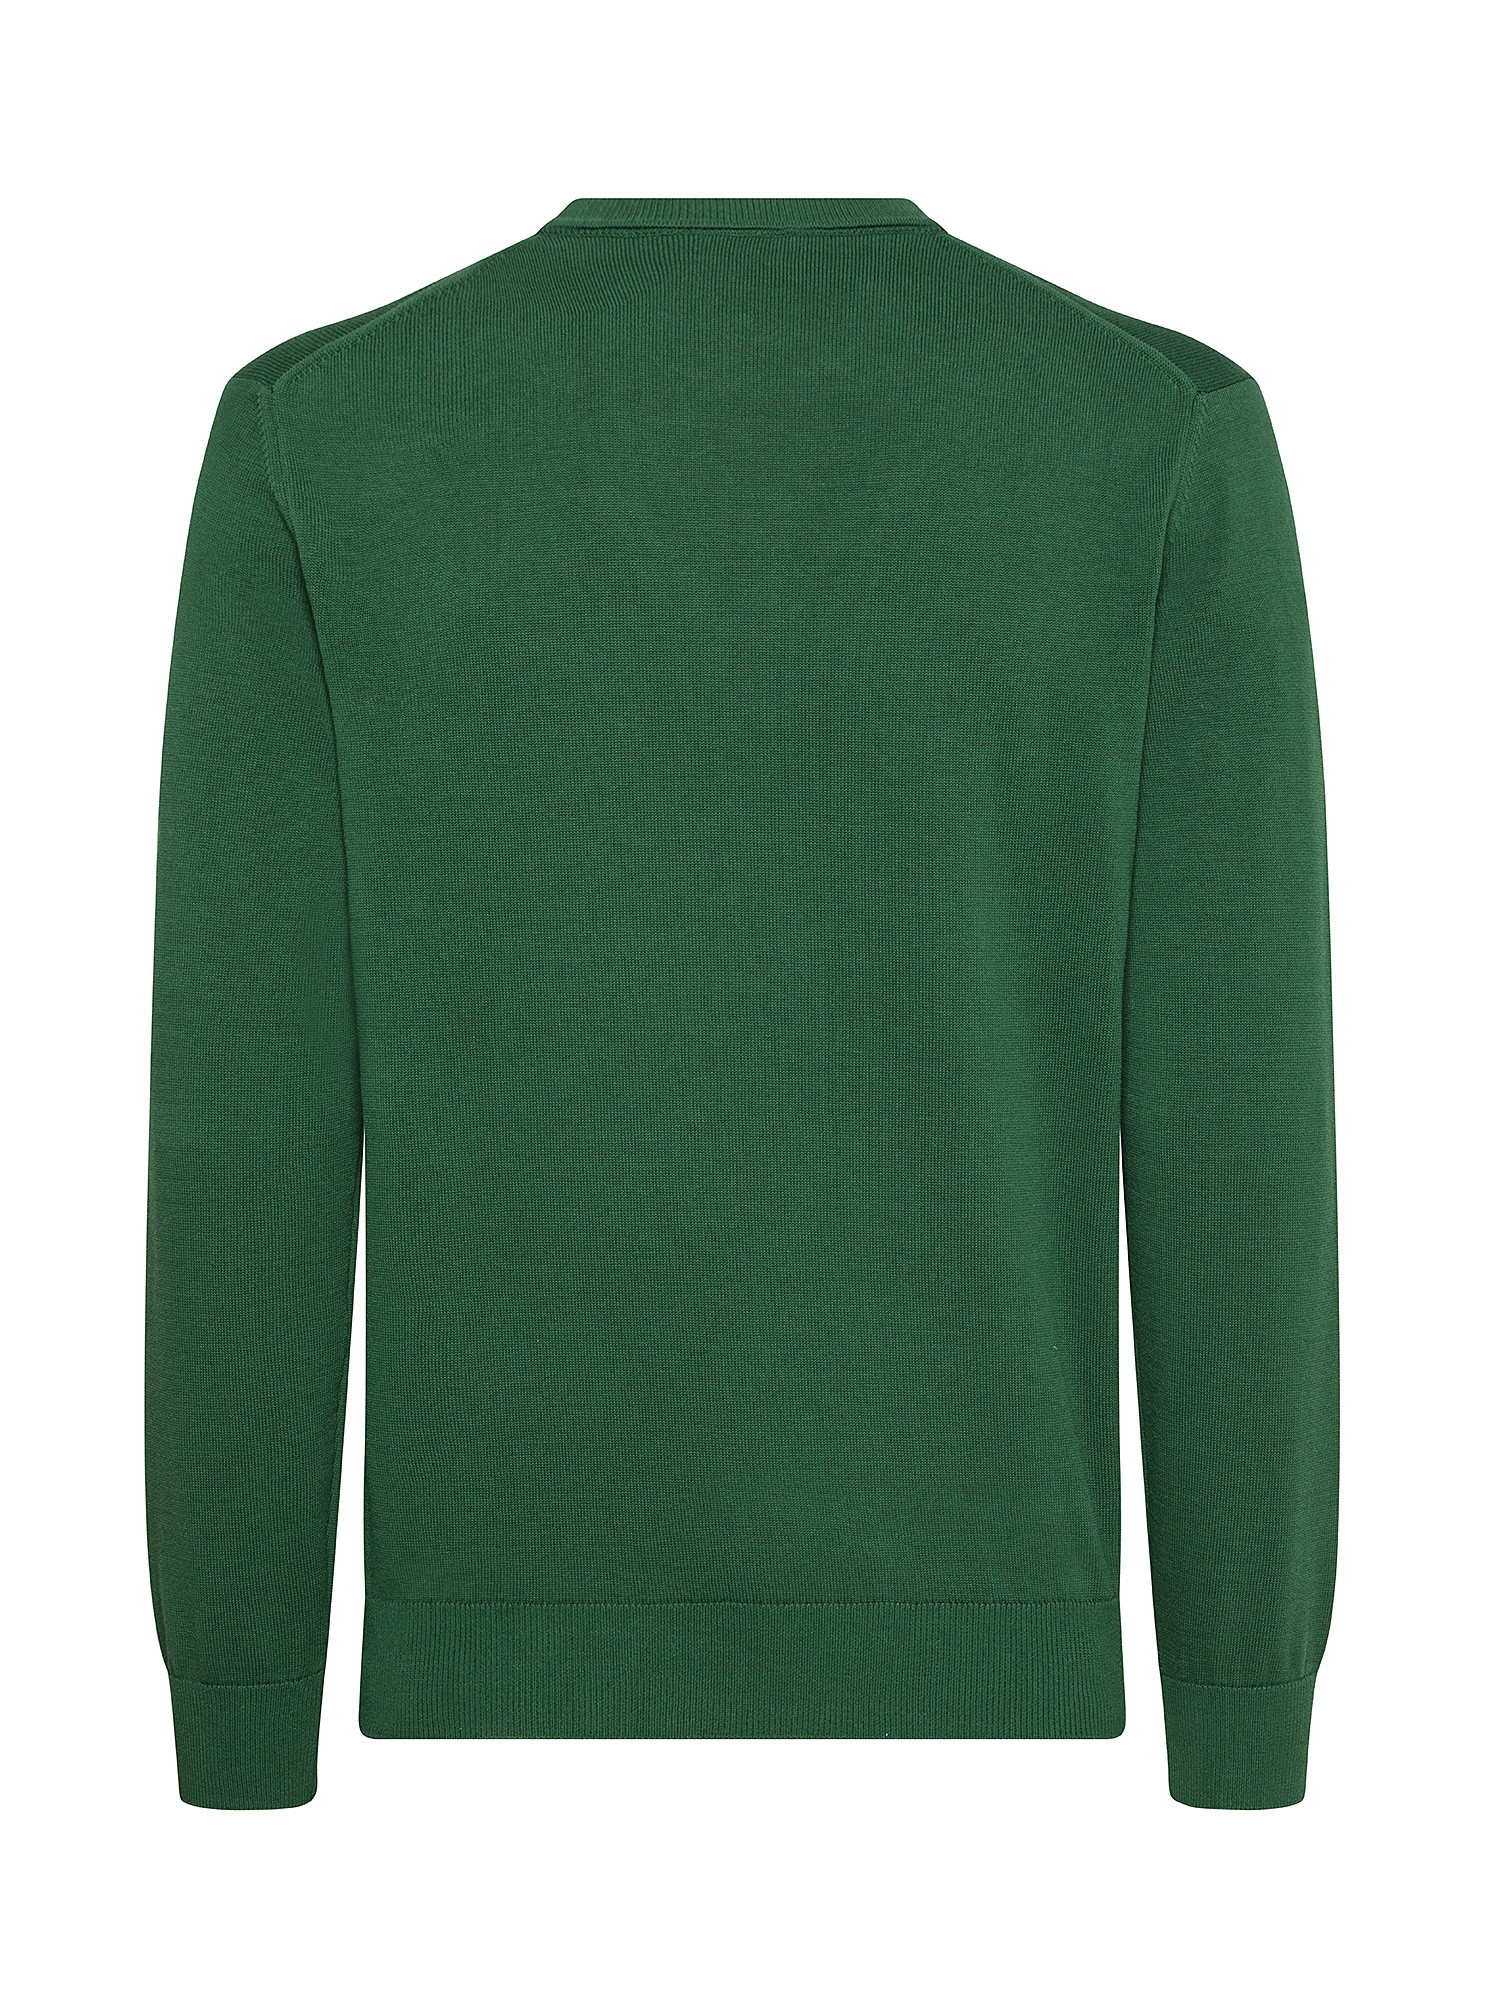 Lacoste - Cotton crewneck sweater, Green, large image number 1